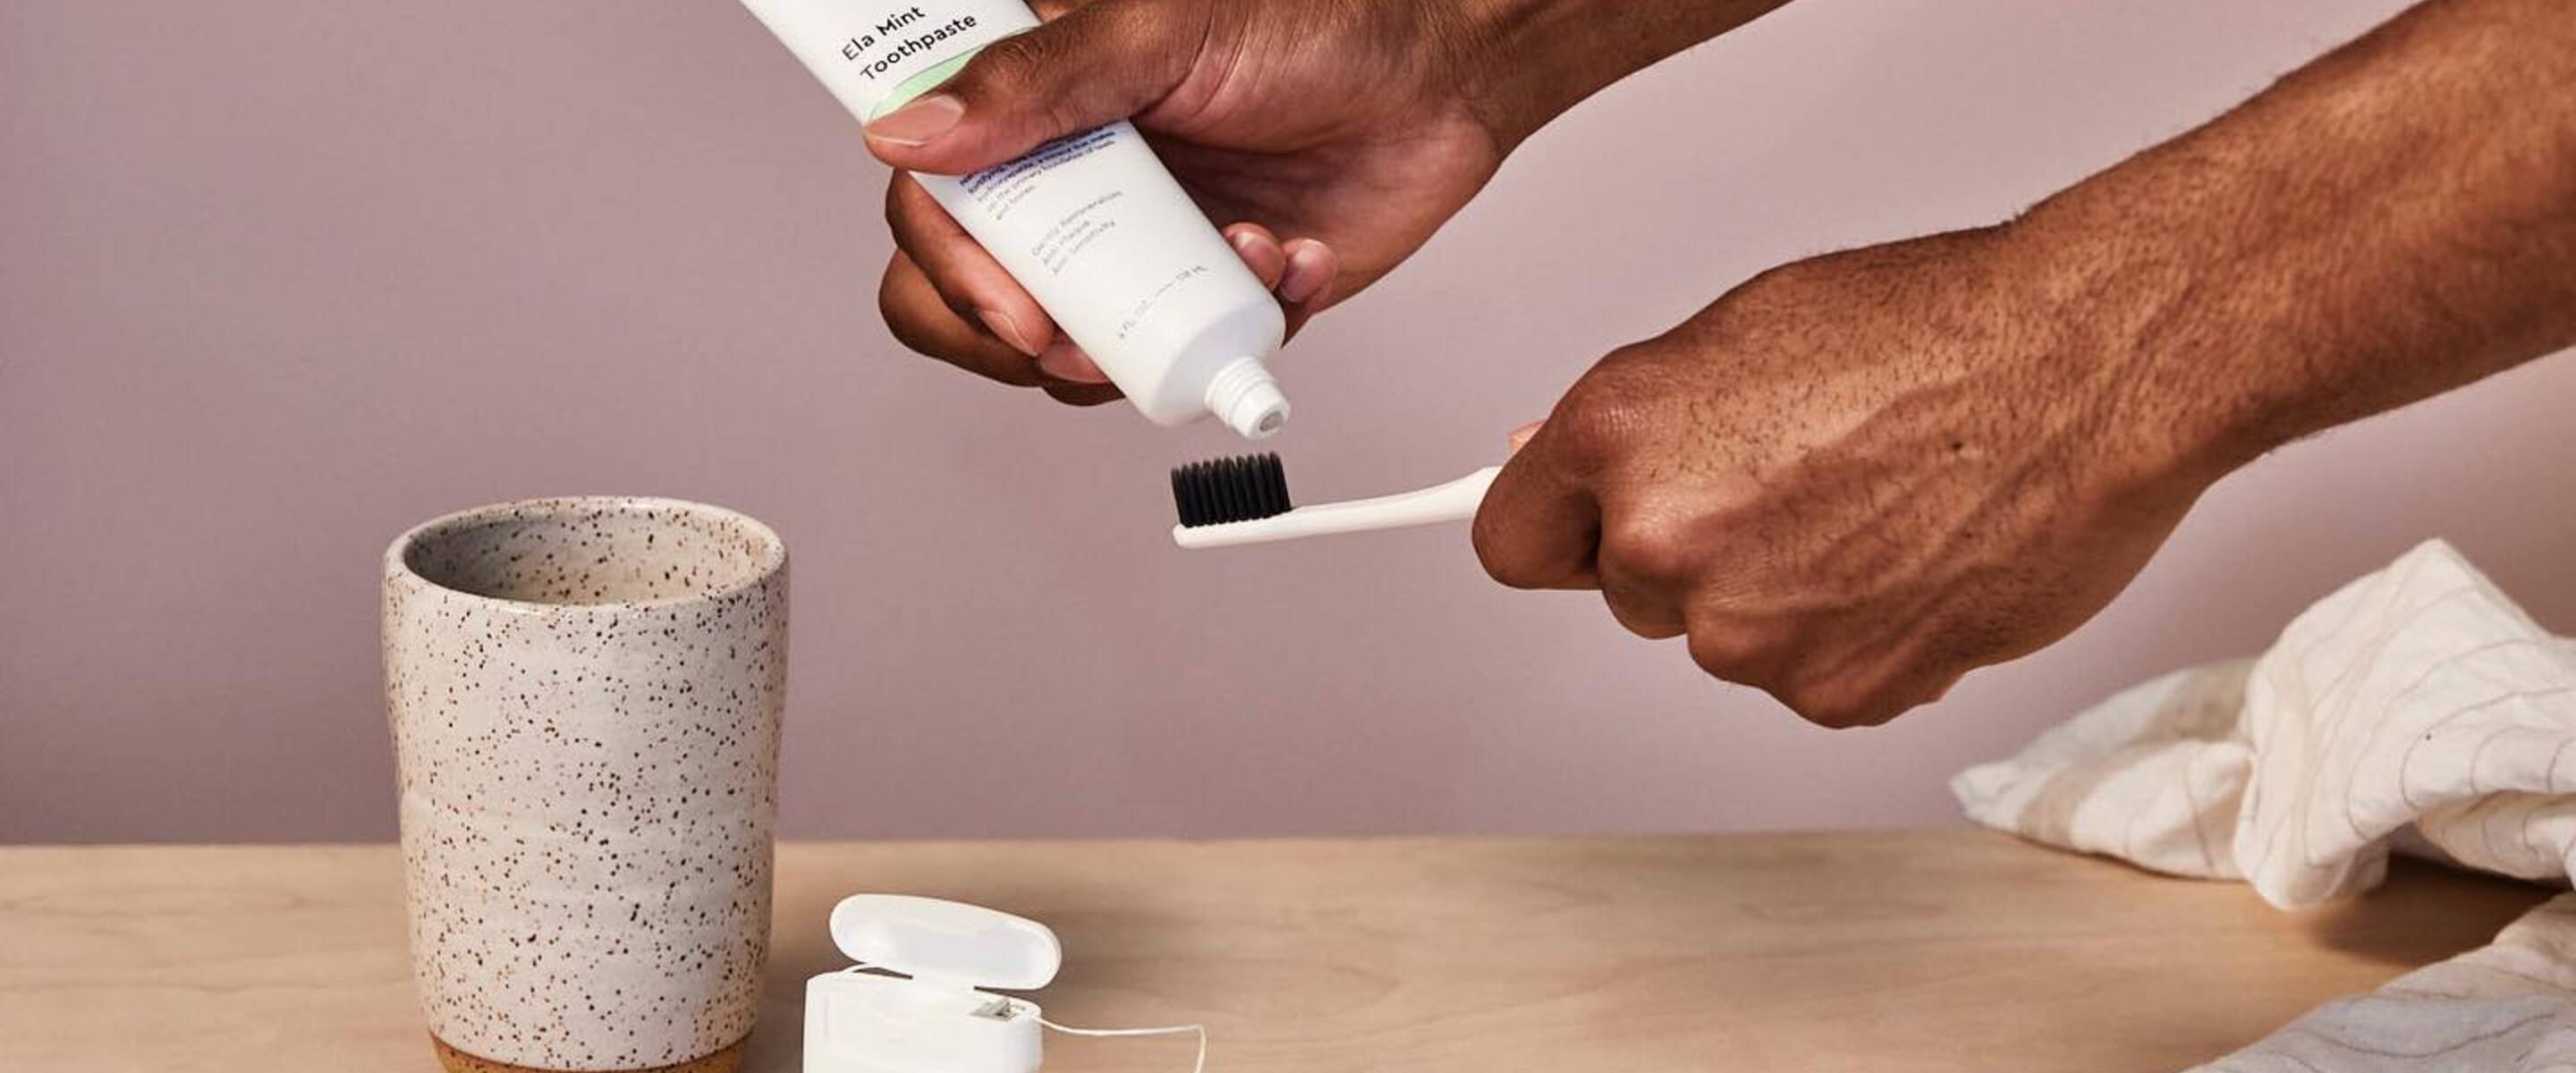 9 Vegan Toothpaste Brands to Try (And Why Isn't Toothpaste Vegan, Anyway?)